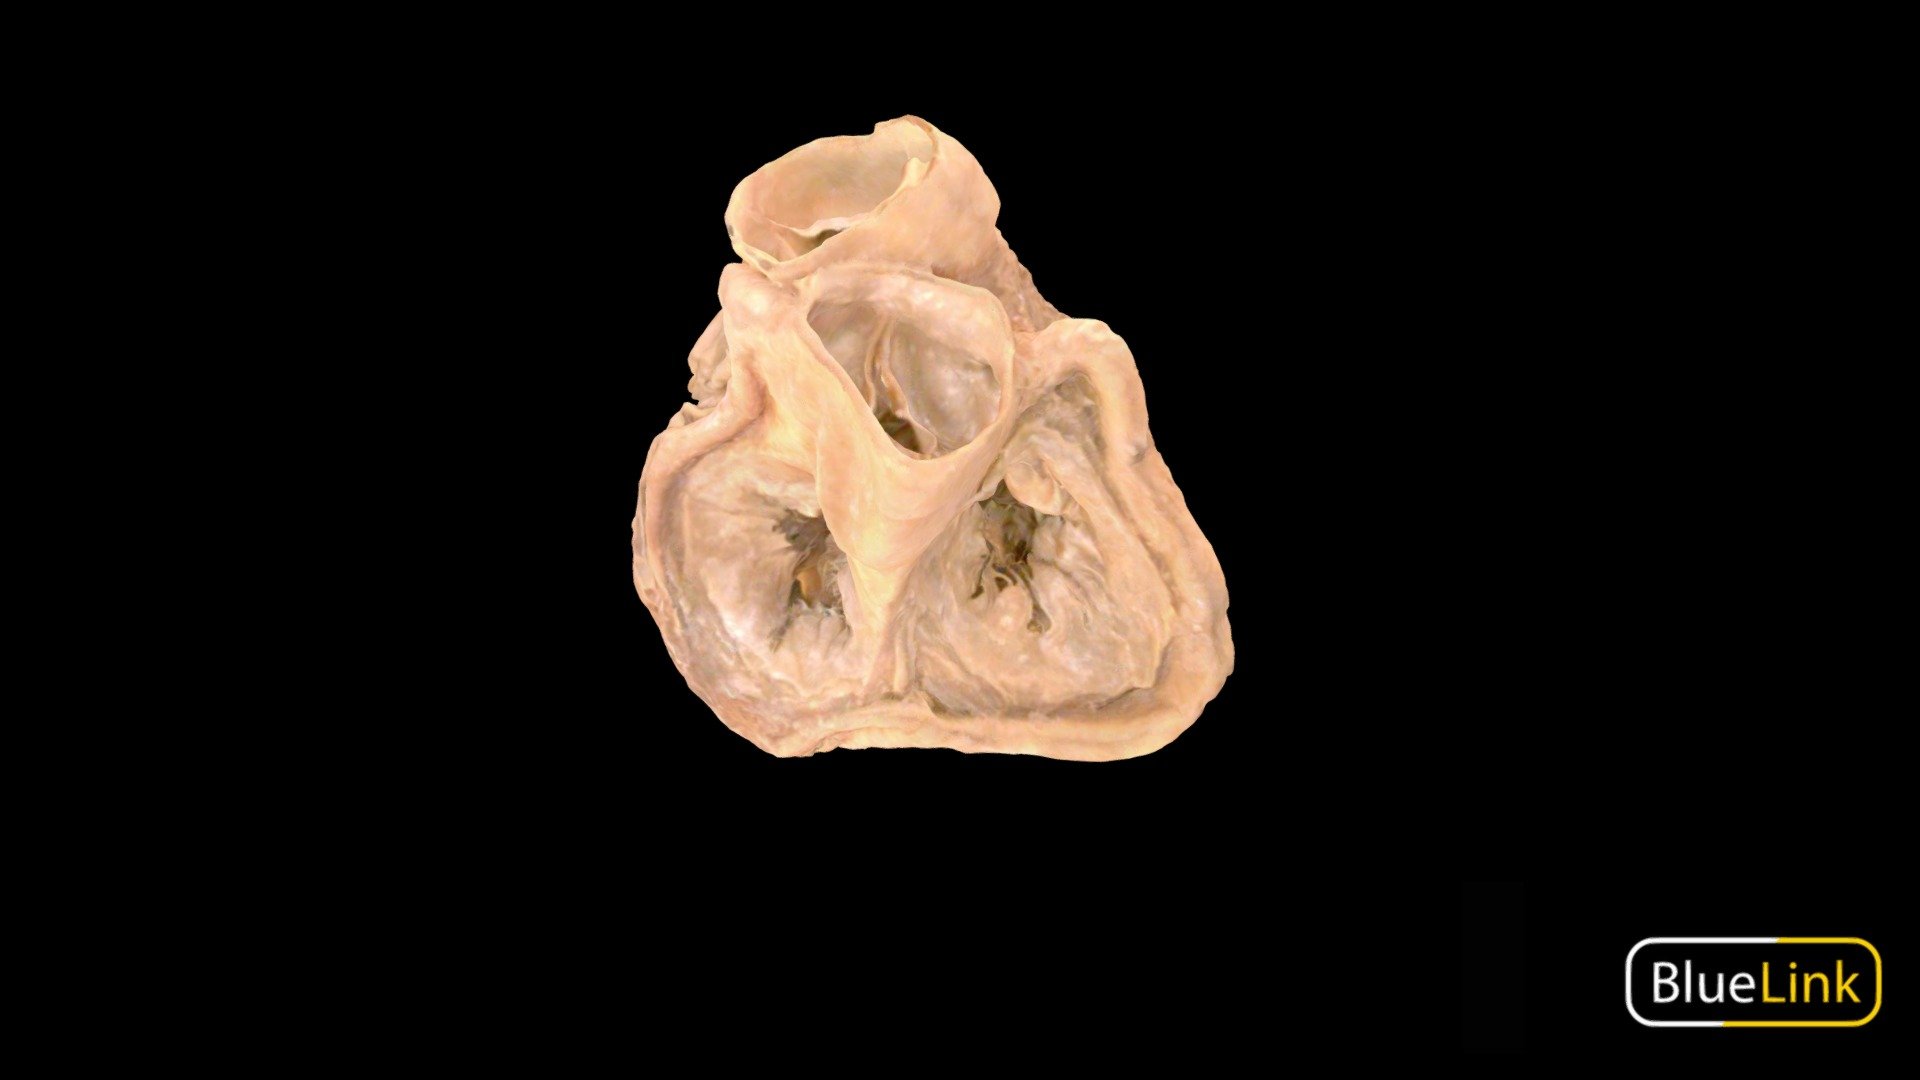 Human heart with atria removed to show heart valves
Captured with: Einscan Pro
Captured by: Will Gribbin
Edited by: Cristina Prall
University of Michigan
25981-C01 - Heart Valves - Labeled - 3D model by Bluelink Anatomy - University of Michigan (@bluelinkanatomy) 3d model